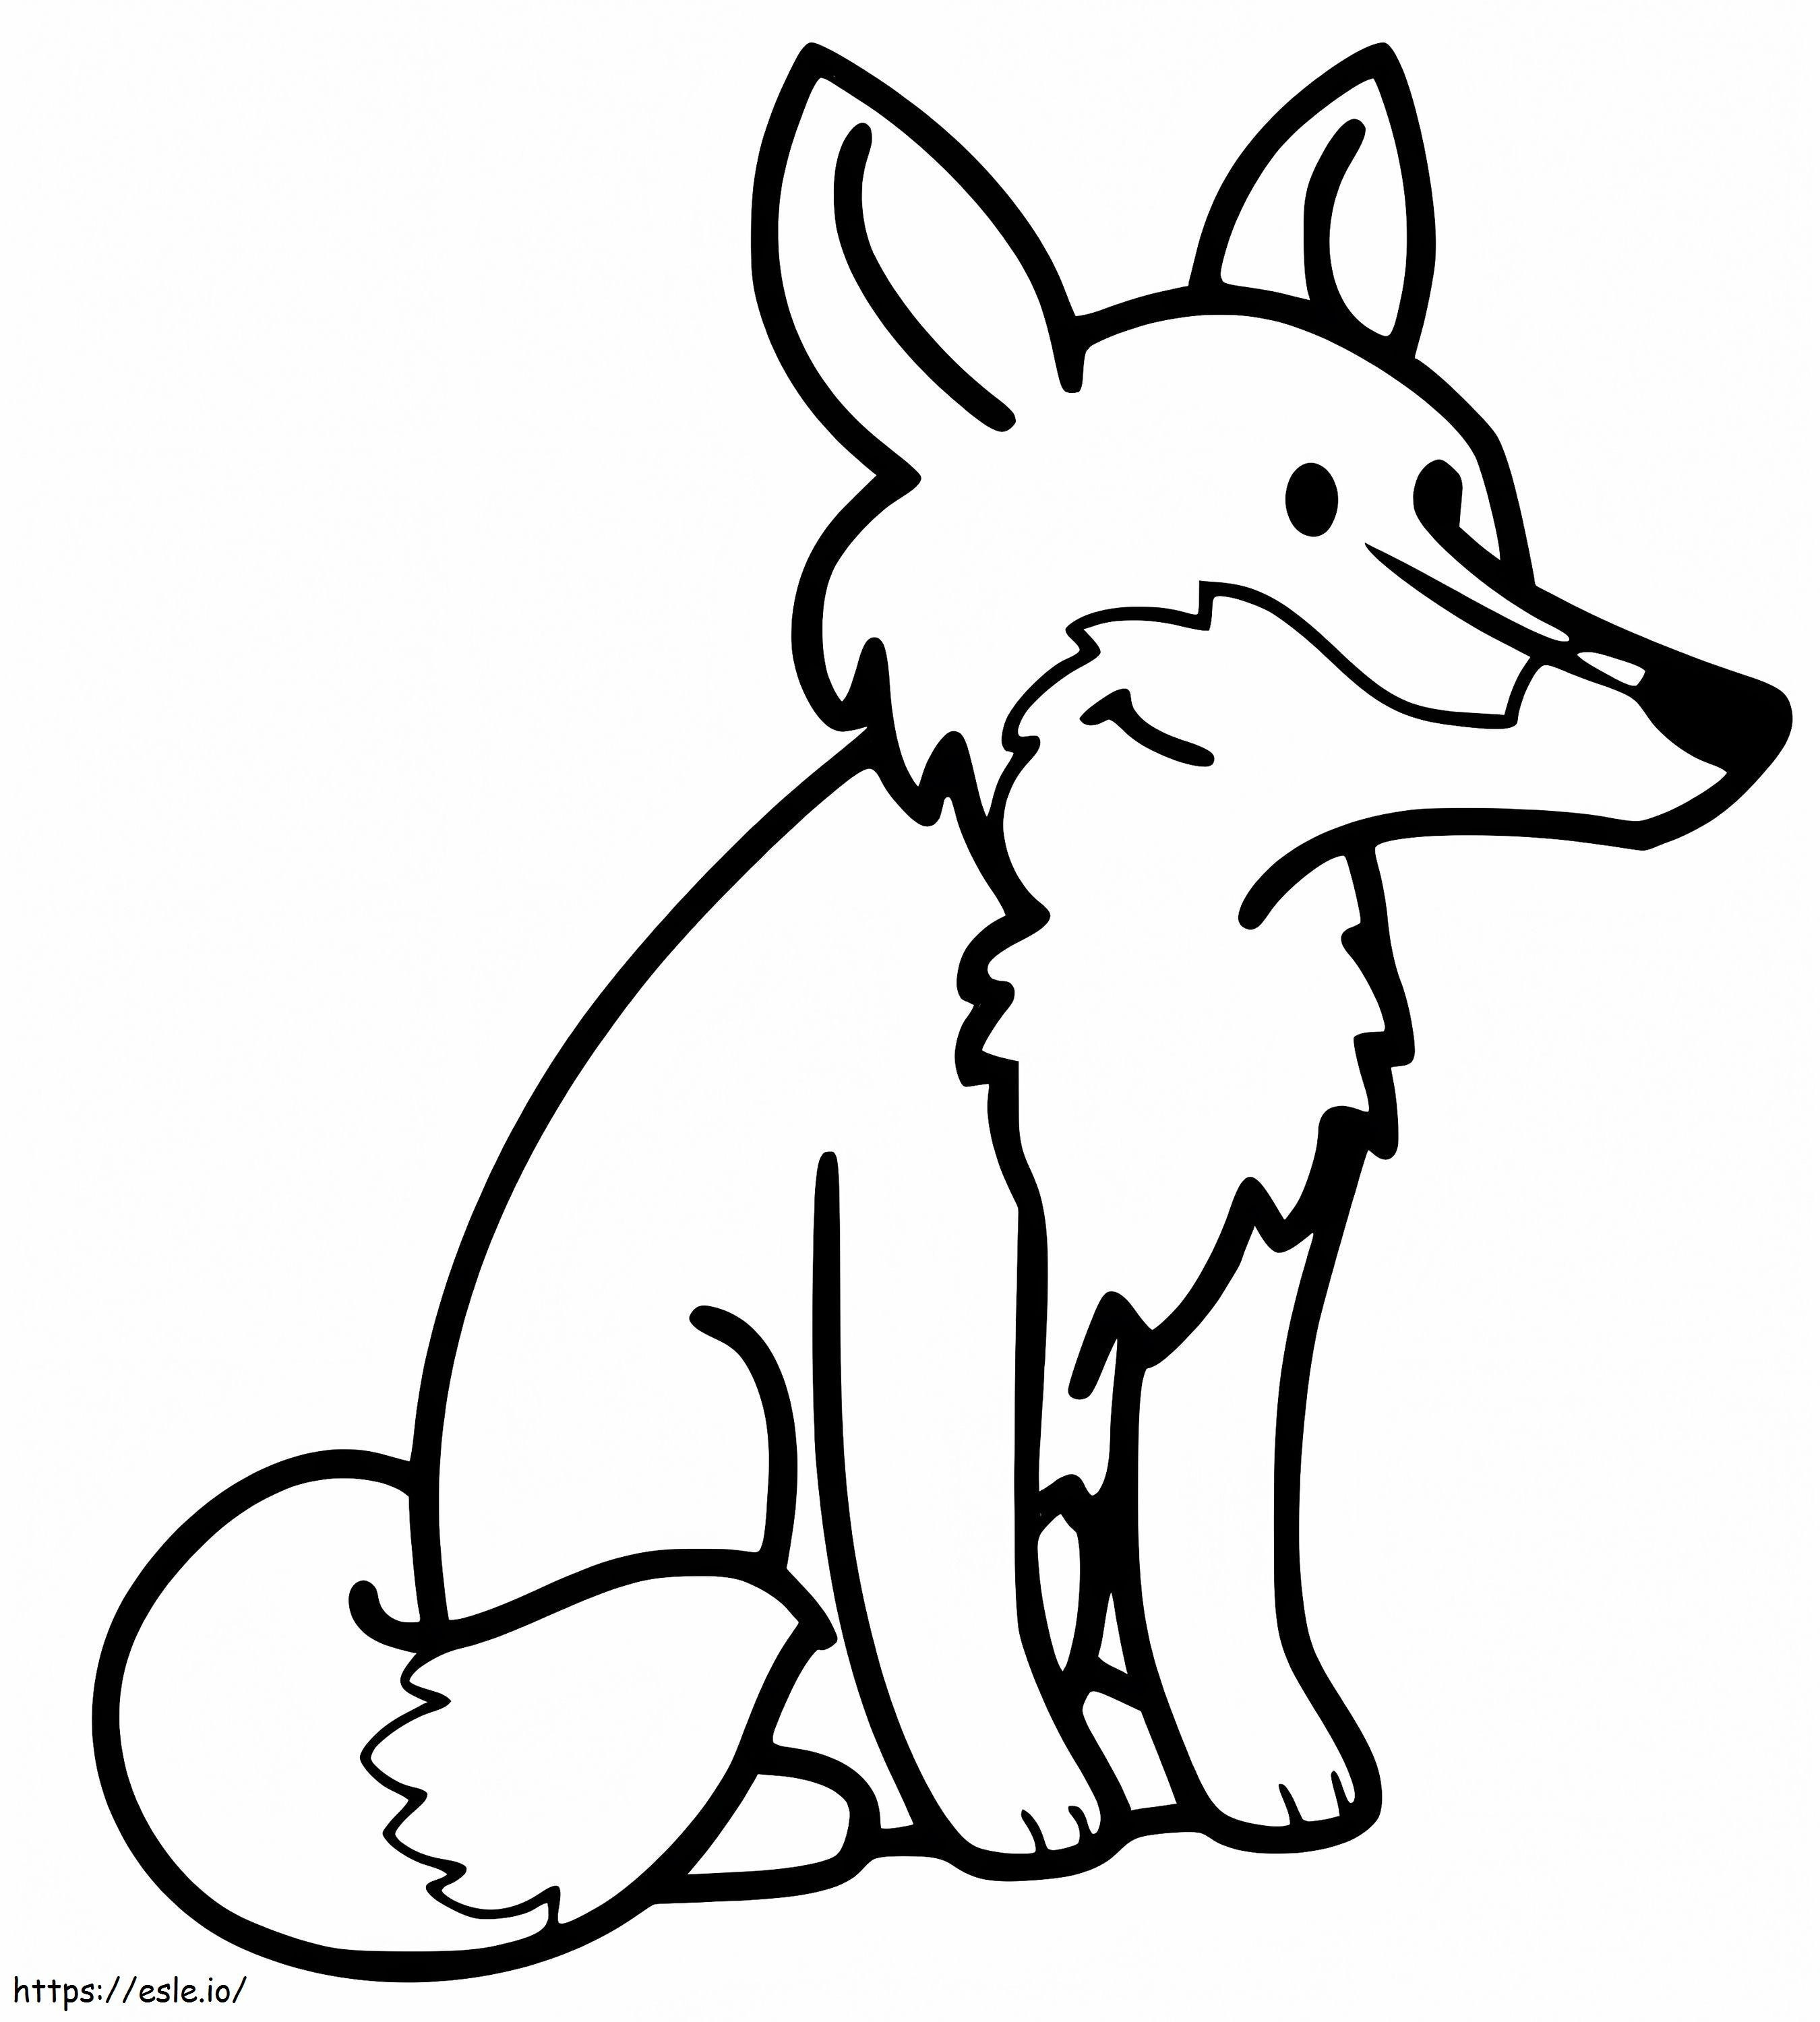 Smiling Fox coloring page